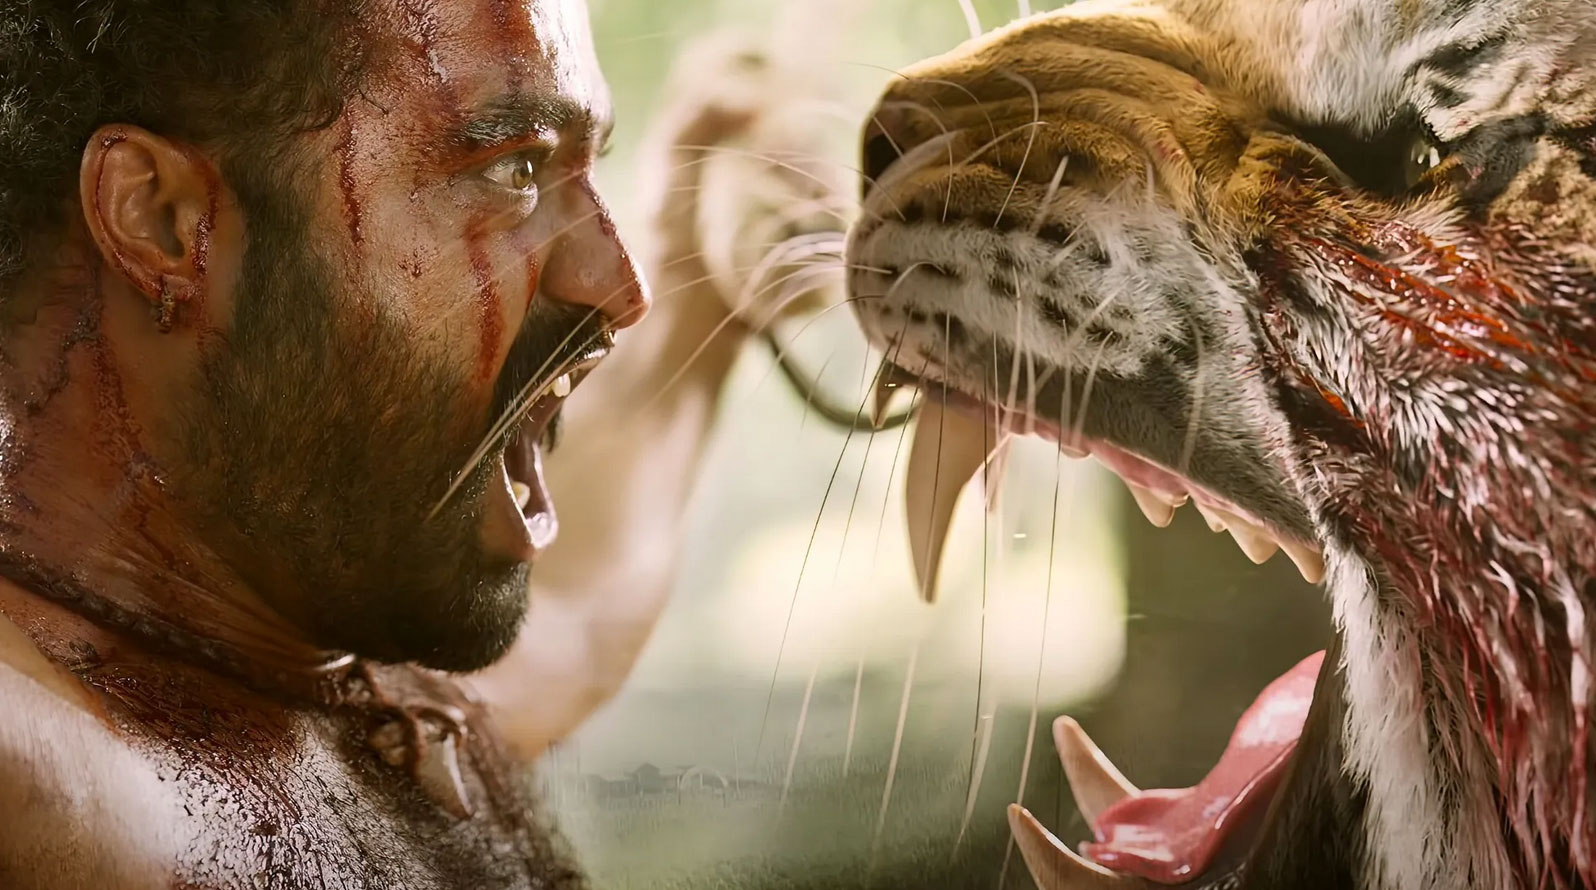 A film still from the movie RRR depicting a man facing a very large tiger in close-up; both creatures are roaring at each other. Photo by Netflix.